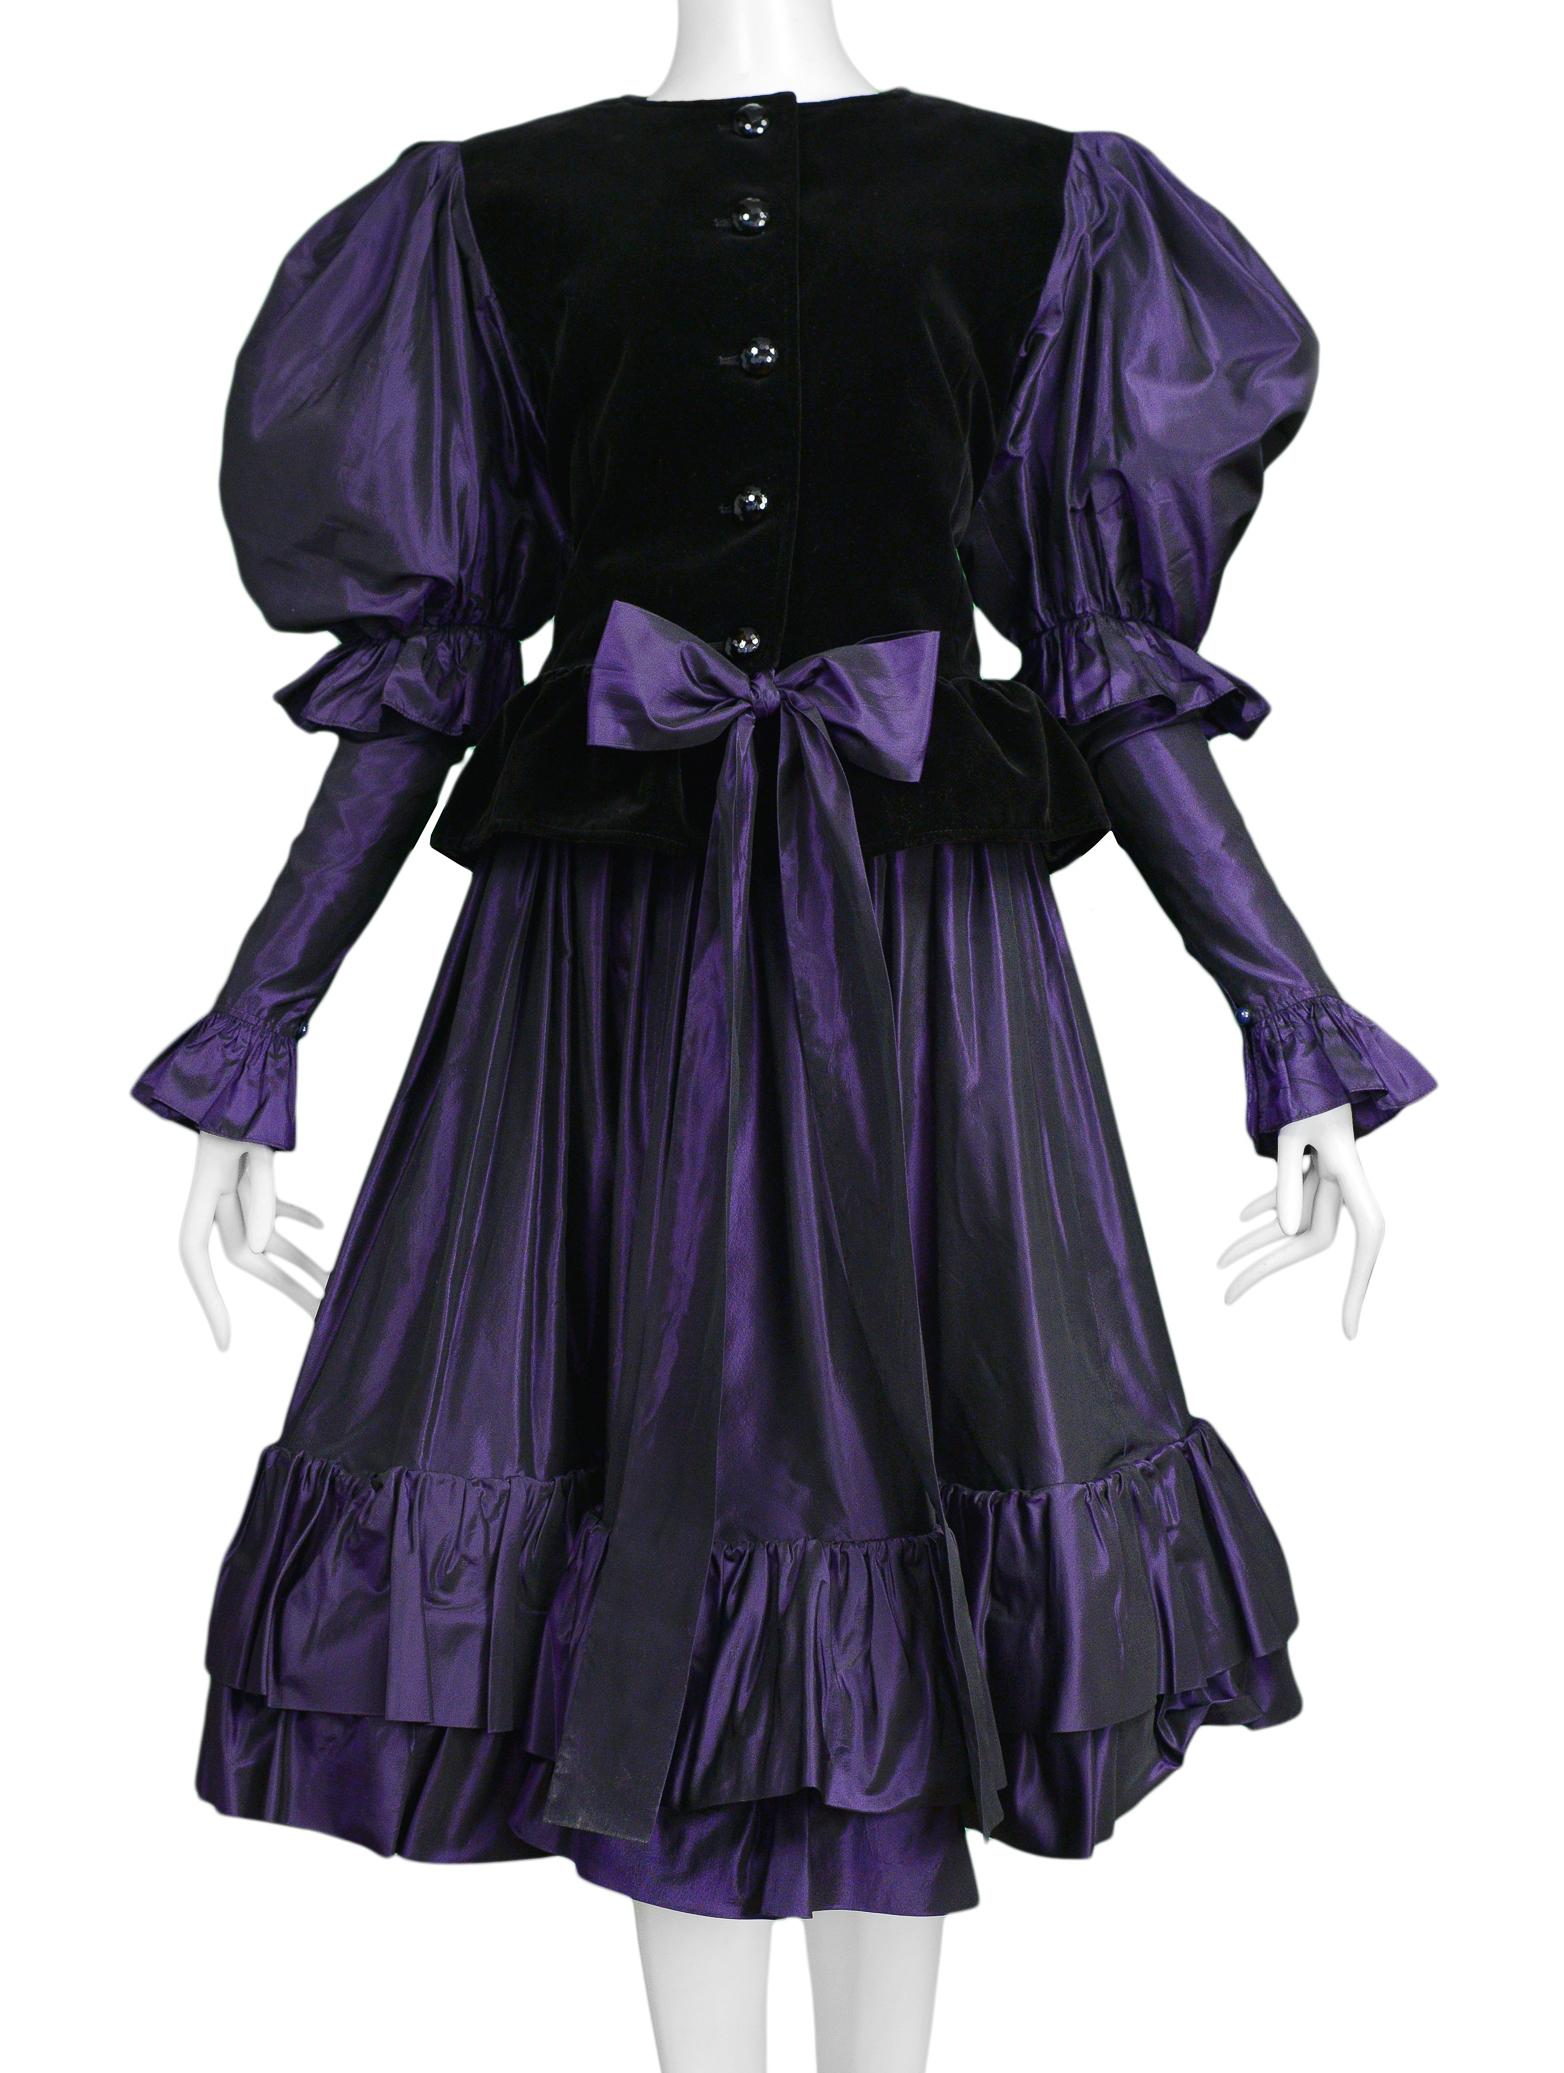 Resurrection Vintage is excited to offer a vintage Yves Saint Laurent purple taffeta ensemble featuring a button front jacket with black velvet paneling in the front and back, purple puffed sleeves, and a matching purple taffeta skirt with a ruffle